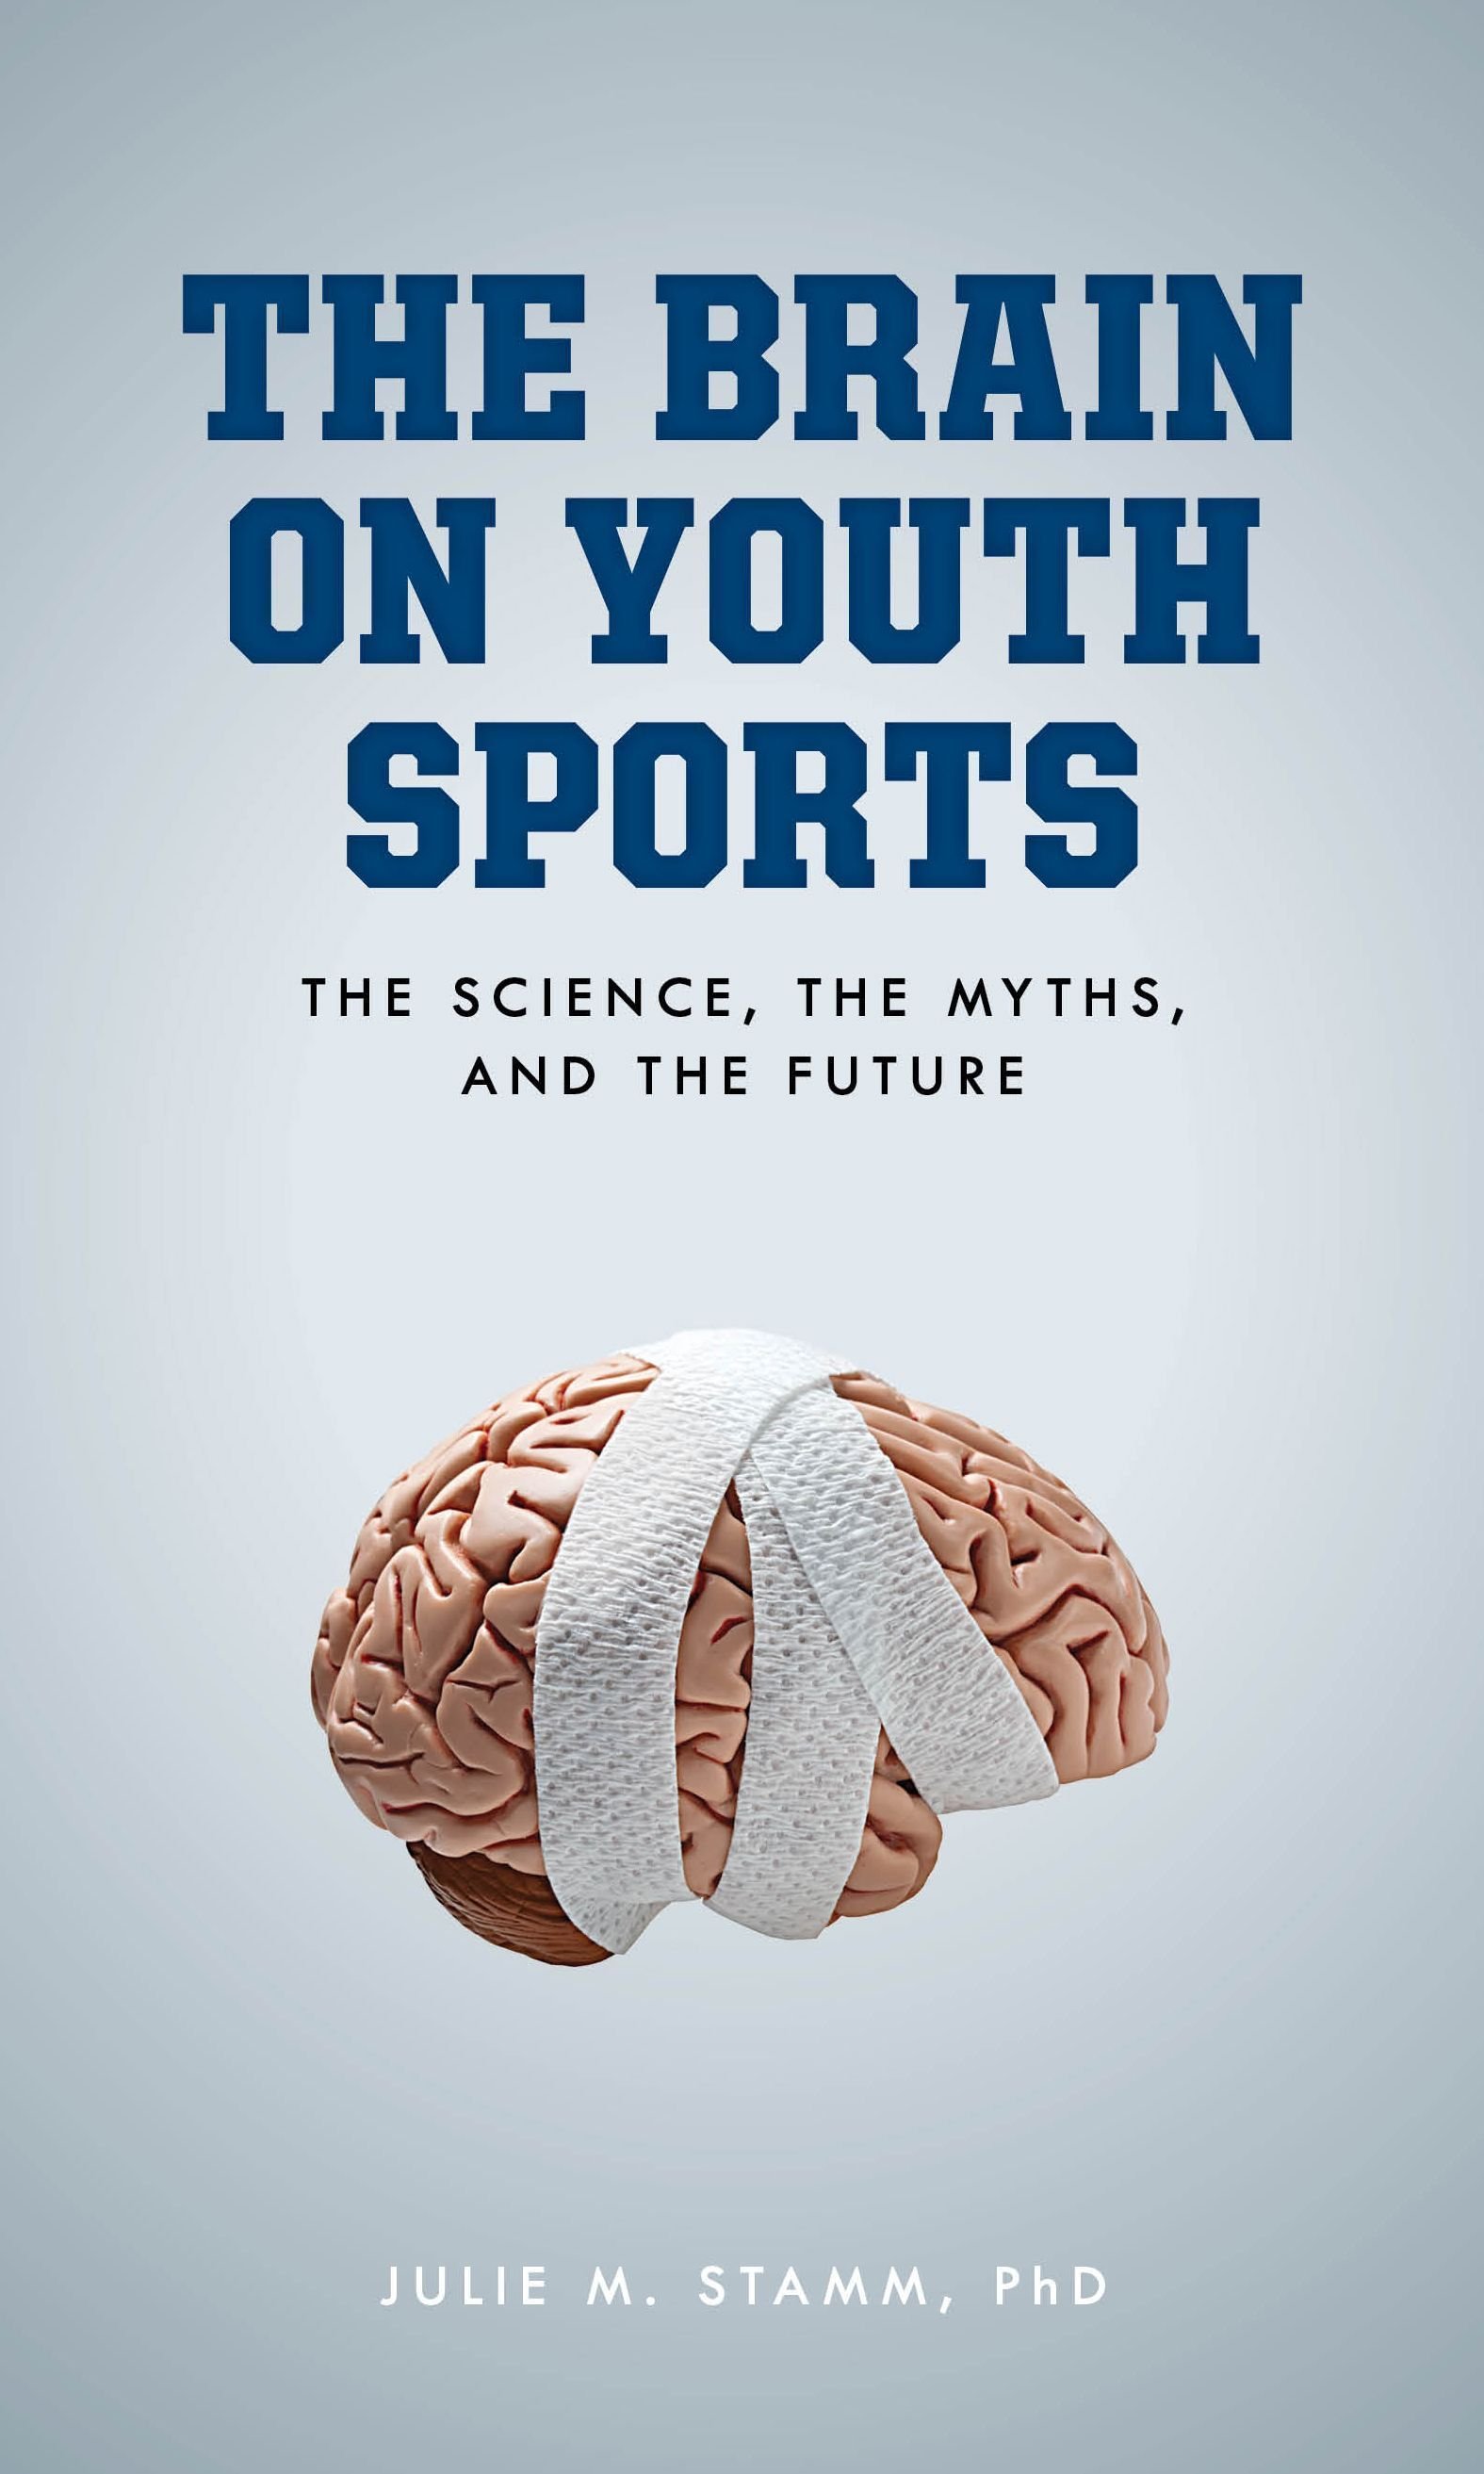 The Brain on Youth Sports